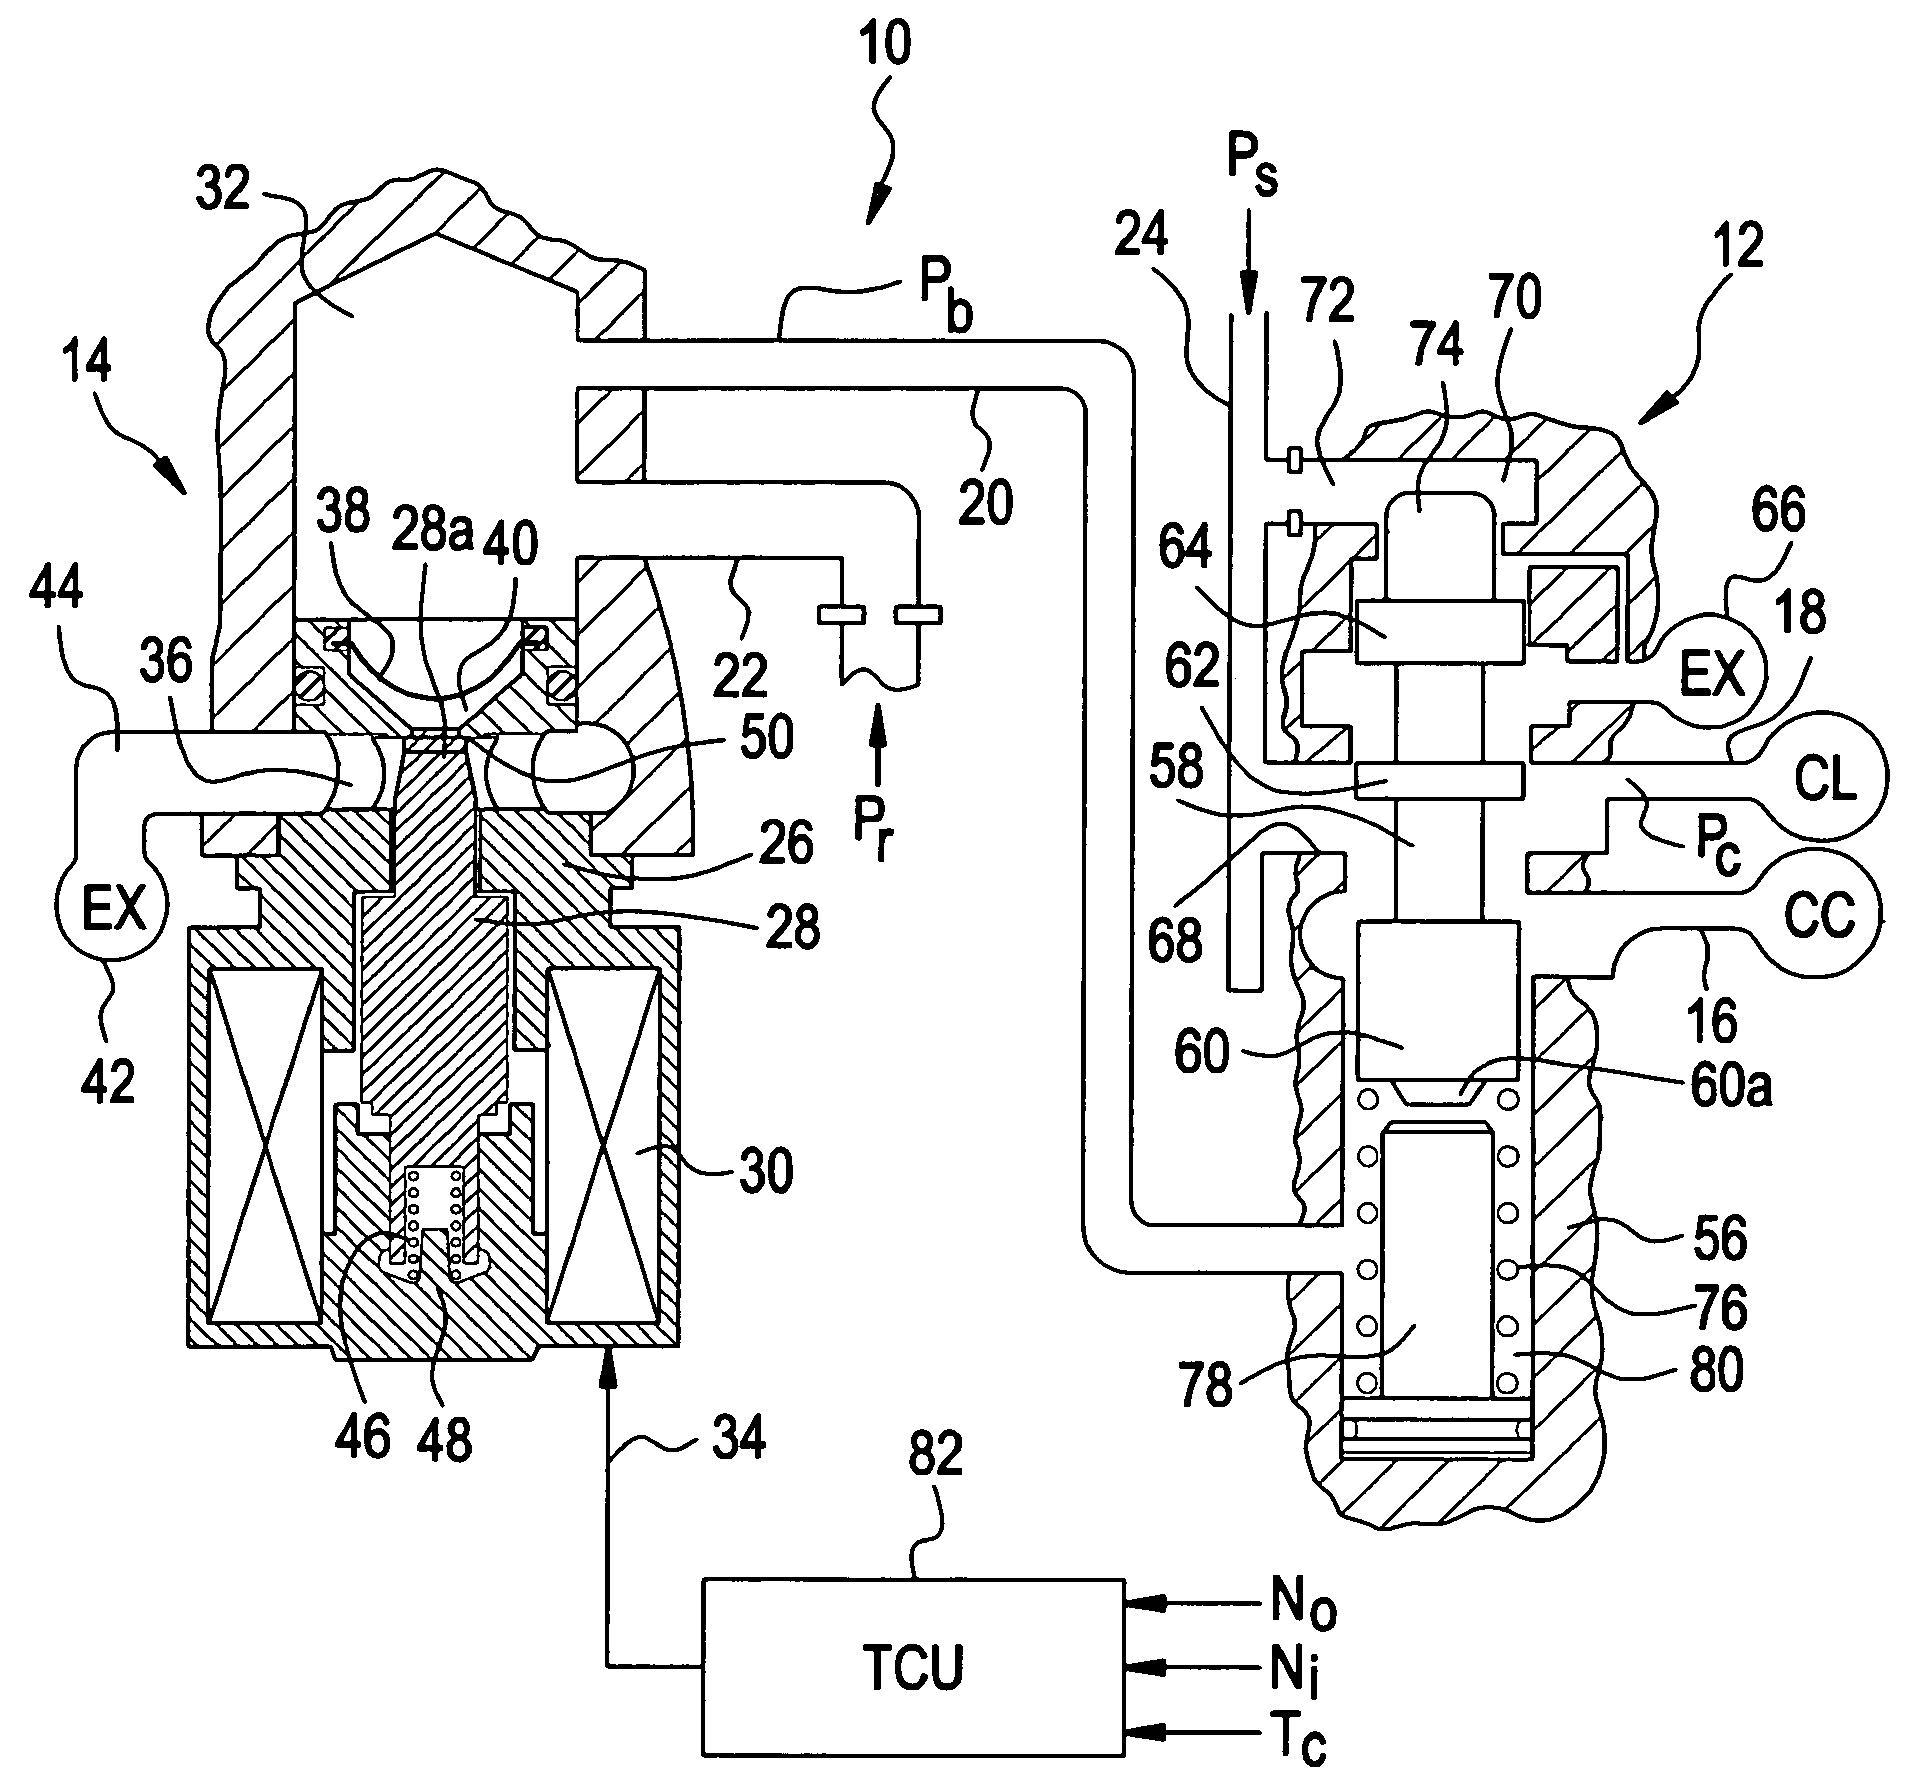 Method of automatically flushing debris from an electrically-operated hydraulic valve